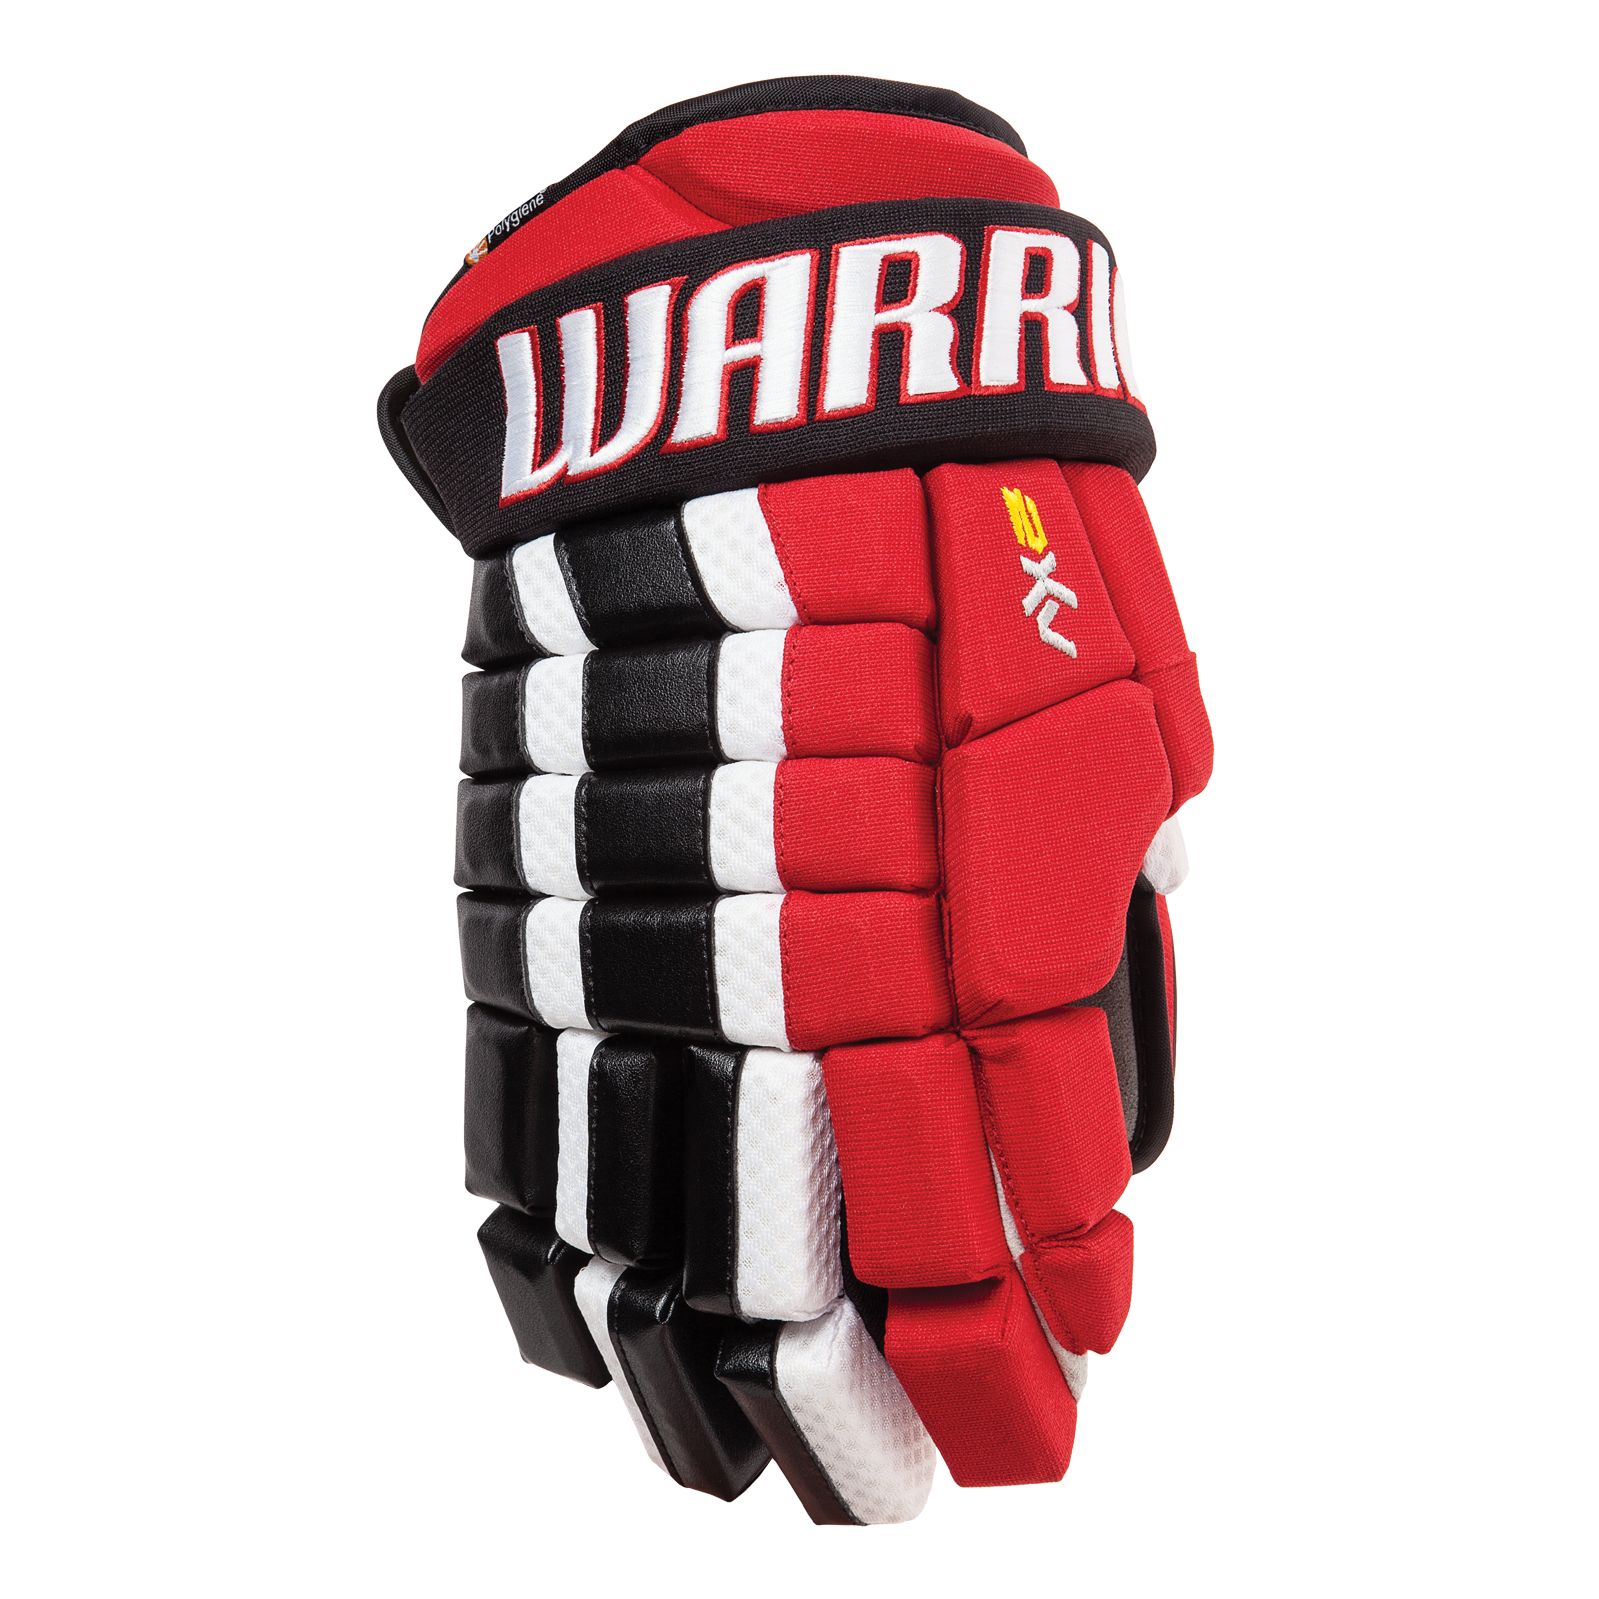 Dynasty AX2 Sr. Glove, Red with Black & White image number 0